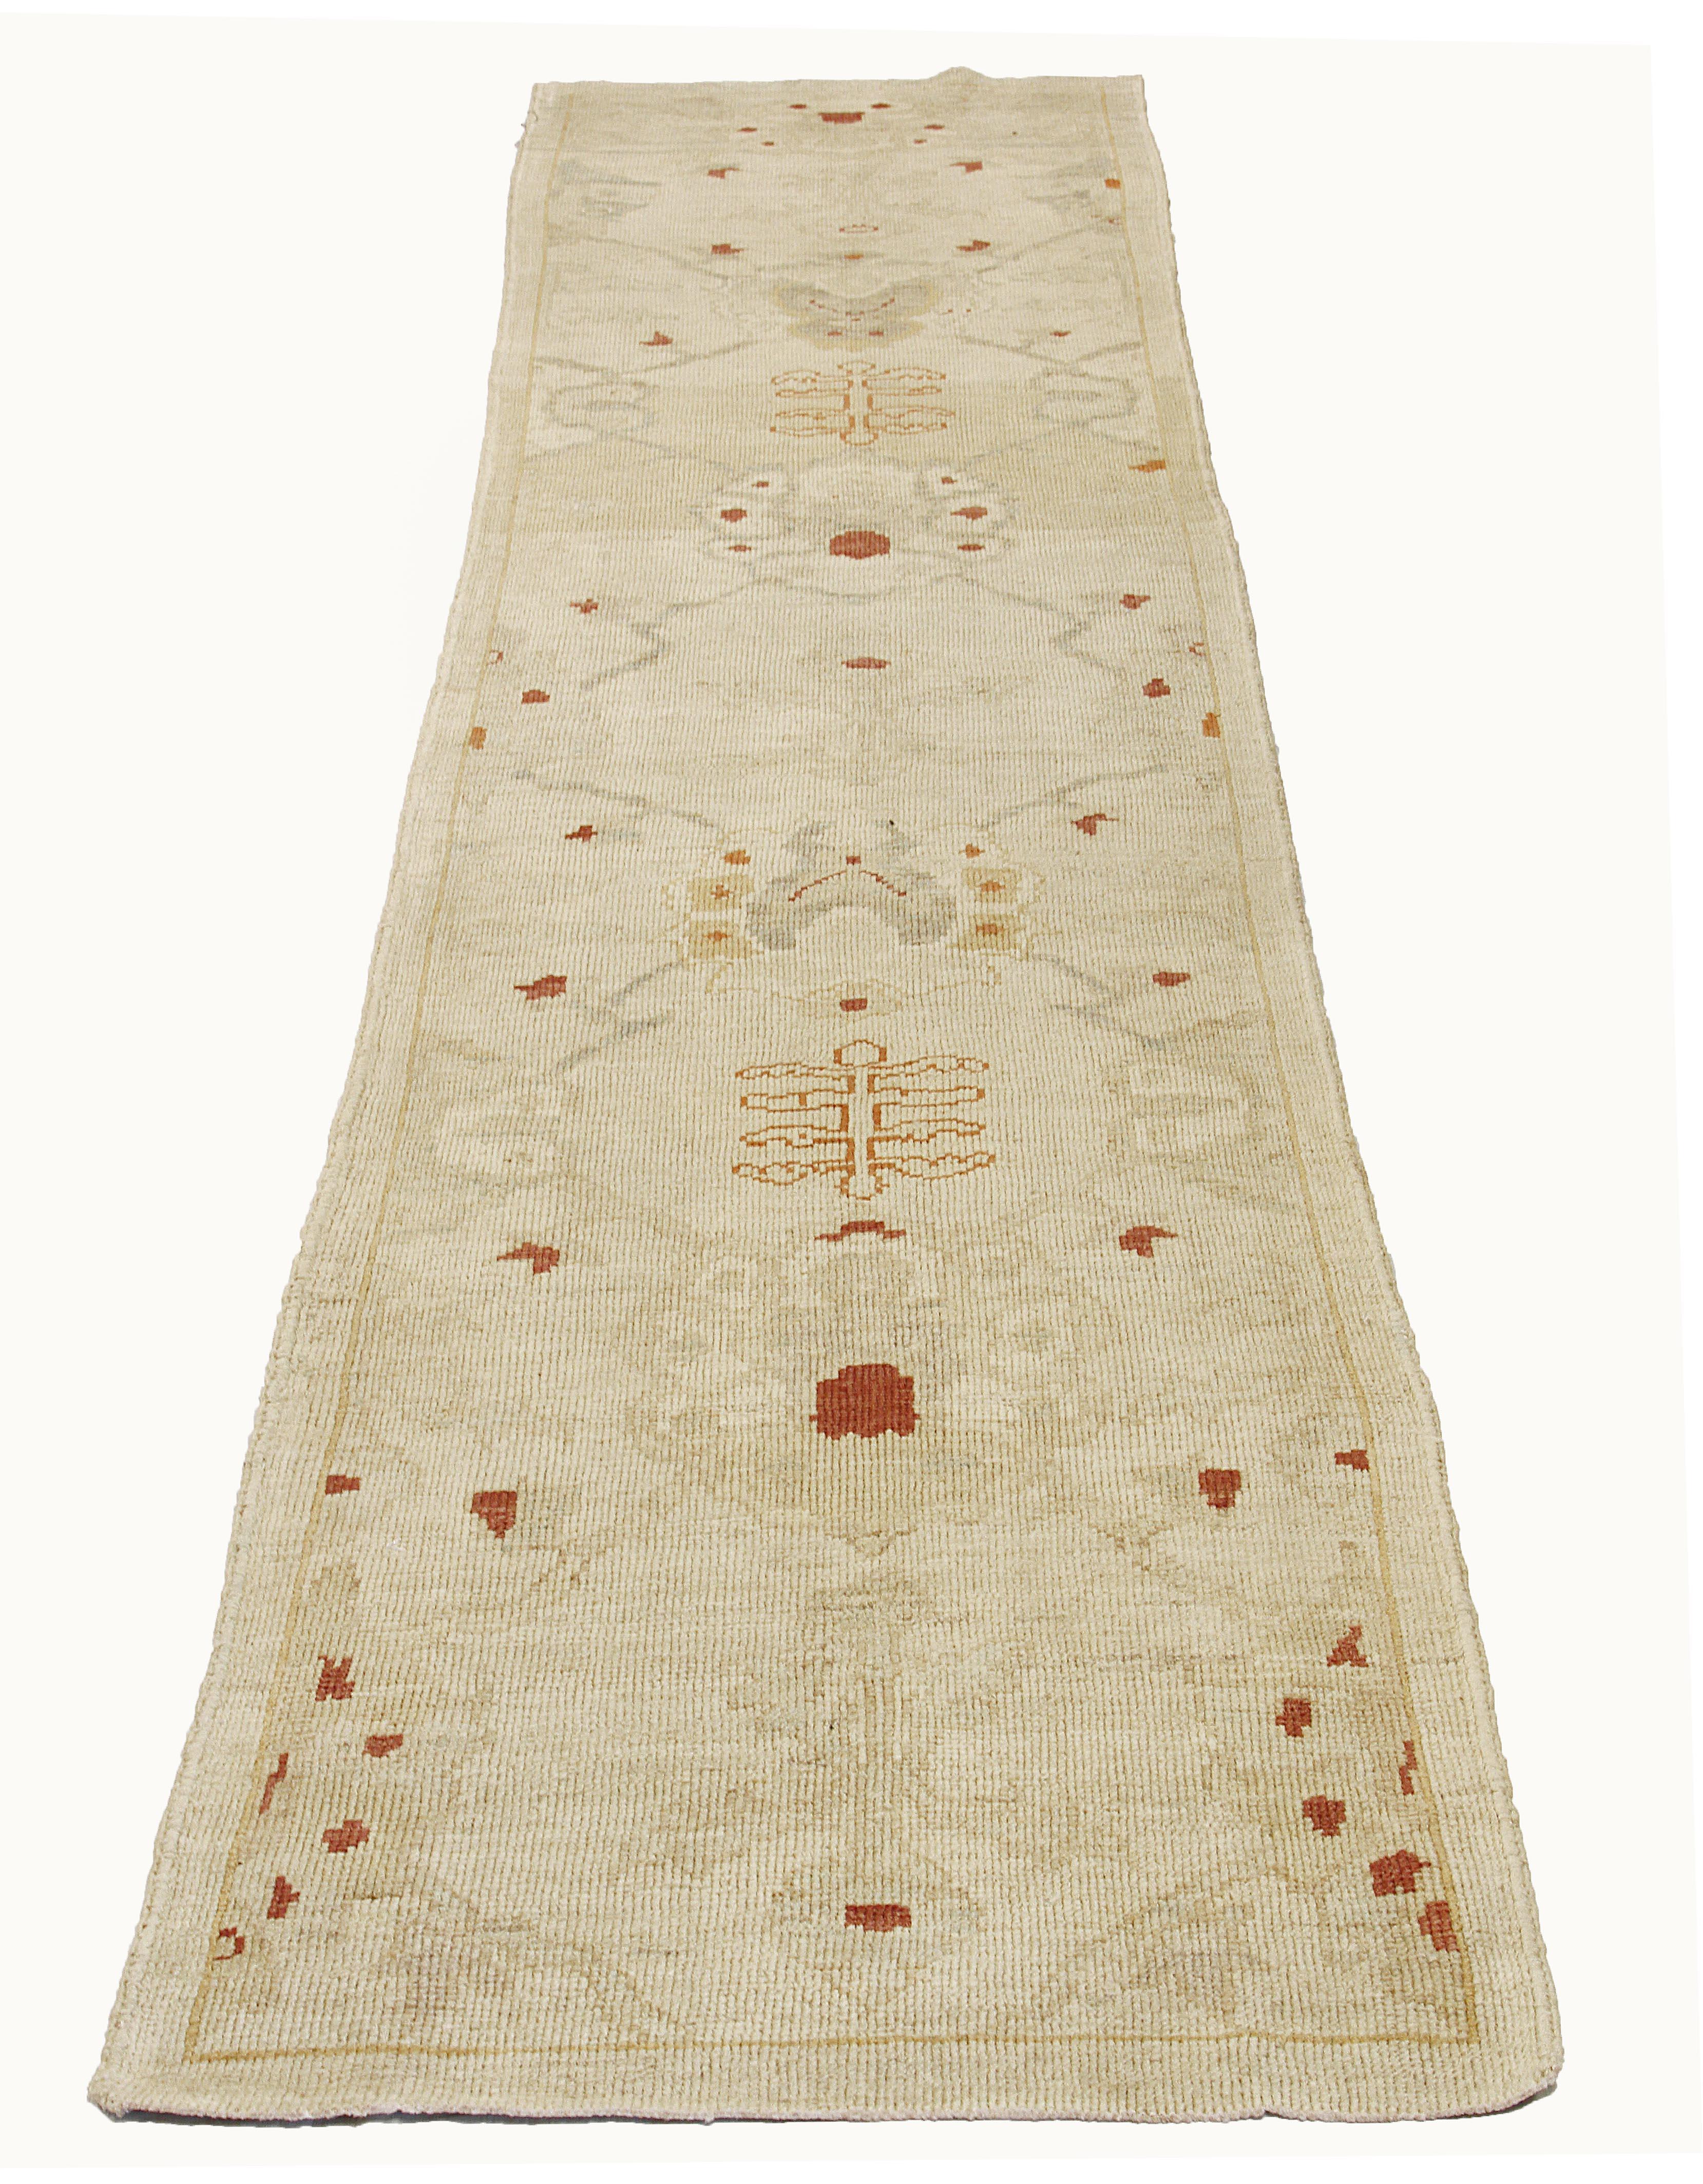 Contemporary Persian rug made of handwoven sheep’s wool of the finest quality. It’s colored with organic vegetable dyes that are certified safe for humans and pets alike. It features flower details all-over associated with Oushak weaving from